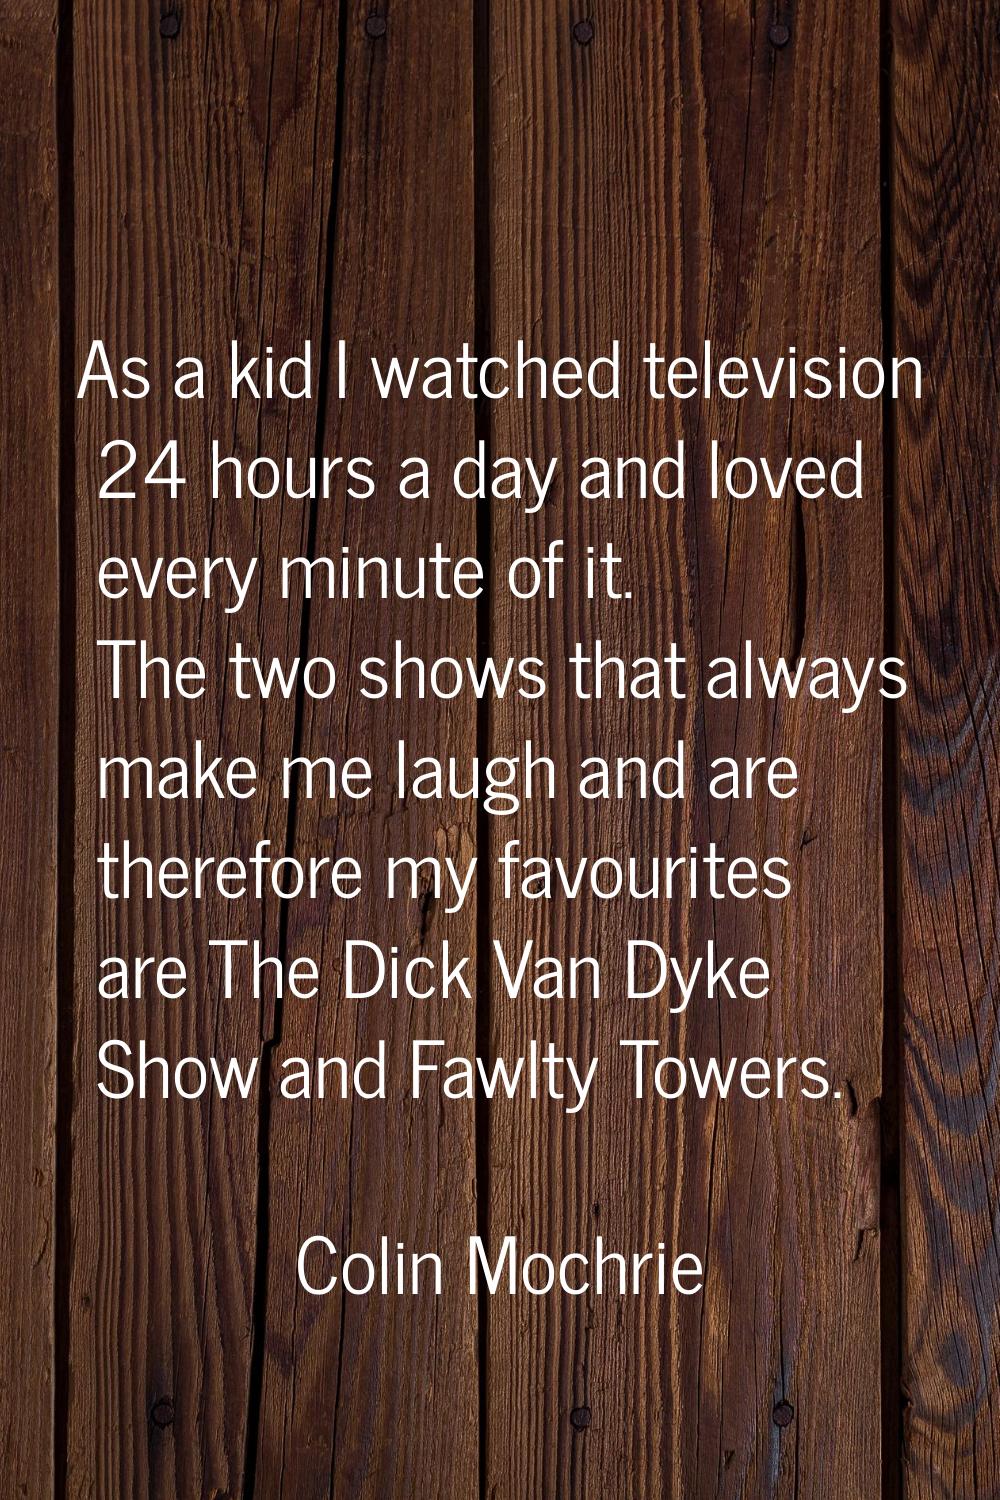 As a kid I watched television 24 hours a day and loved every minute of it. The two shows that alway